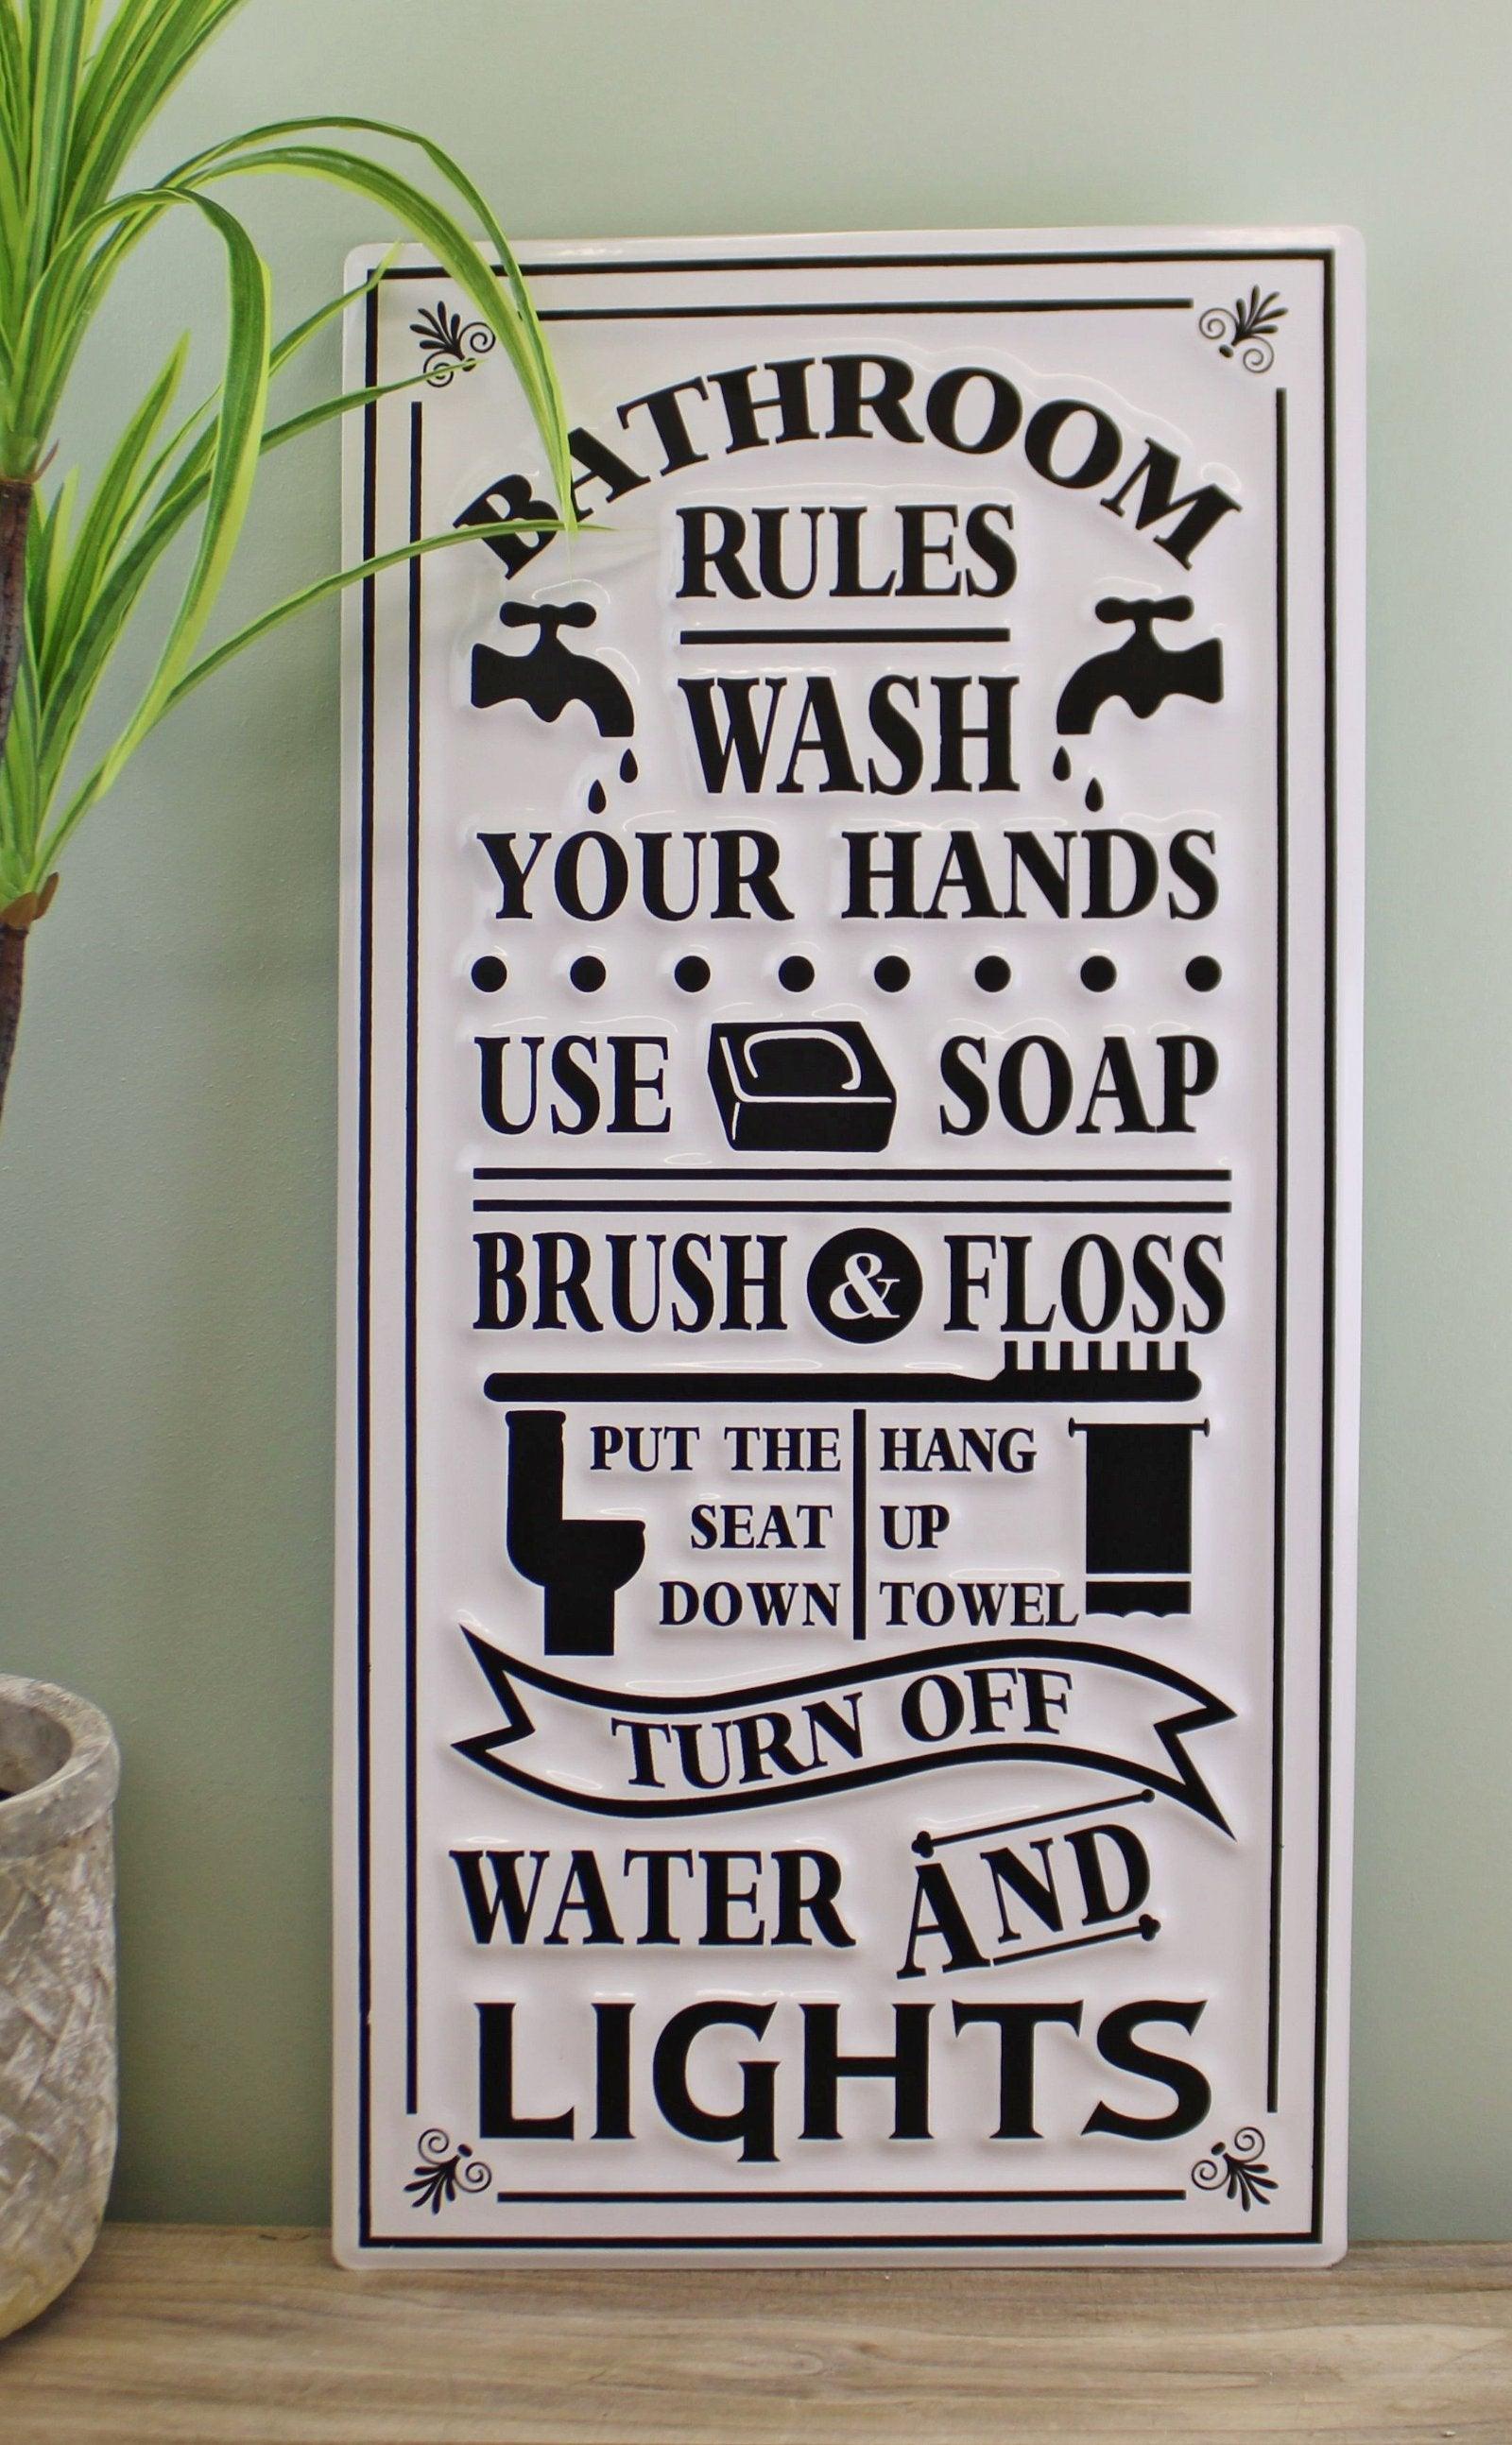 View Metal Wall Hanging Bathroom Rules Plaque 60x30cm information